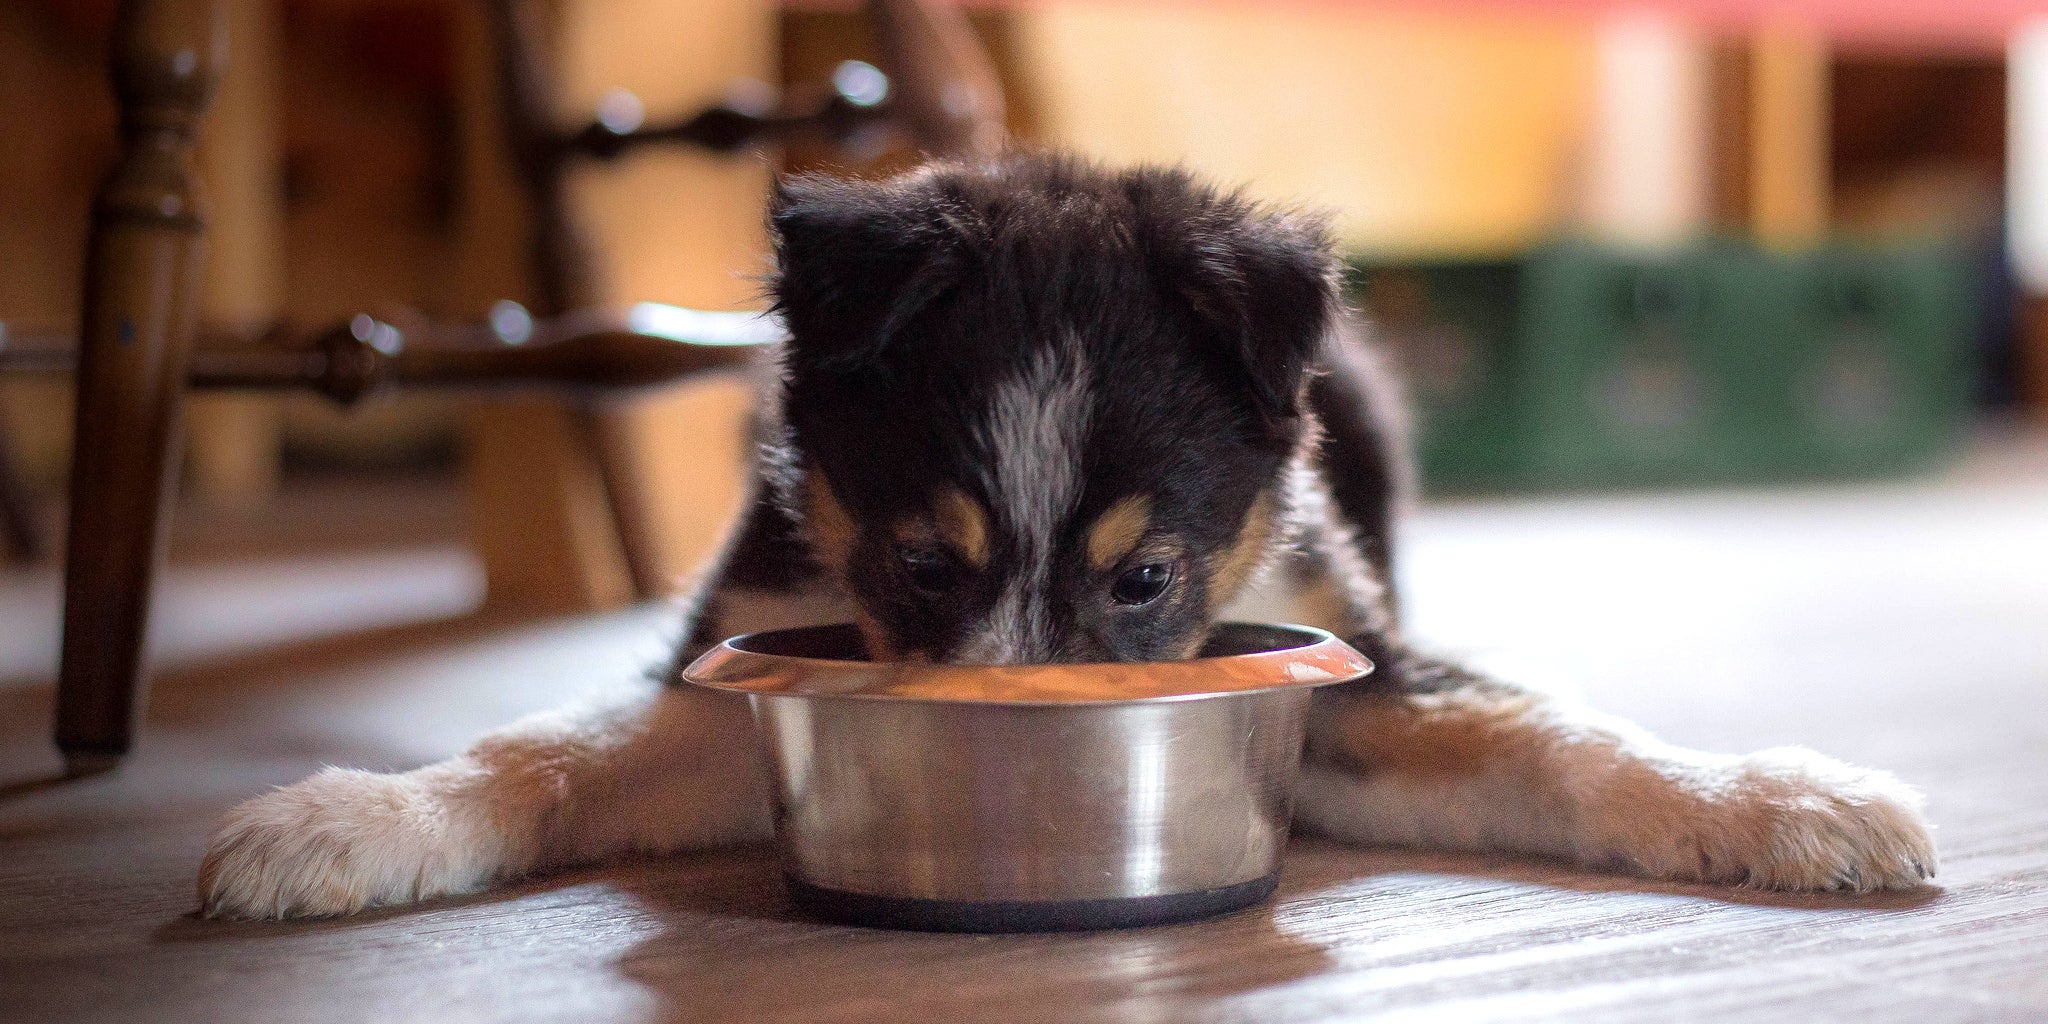 Should You Feed Your Dog Grain-Free Food?